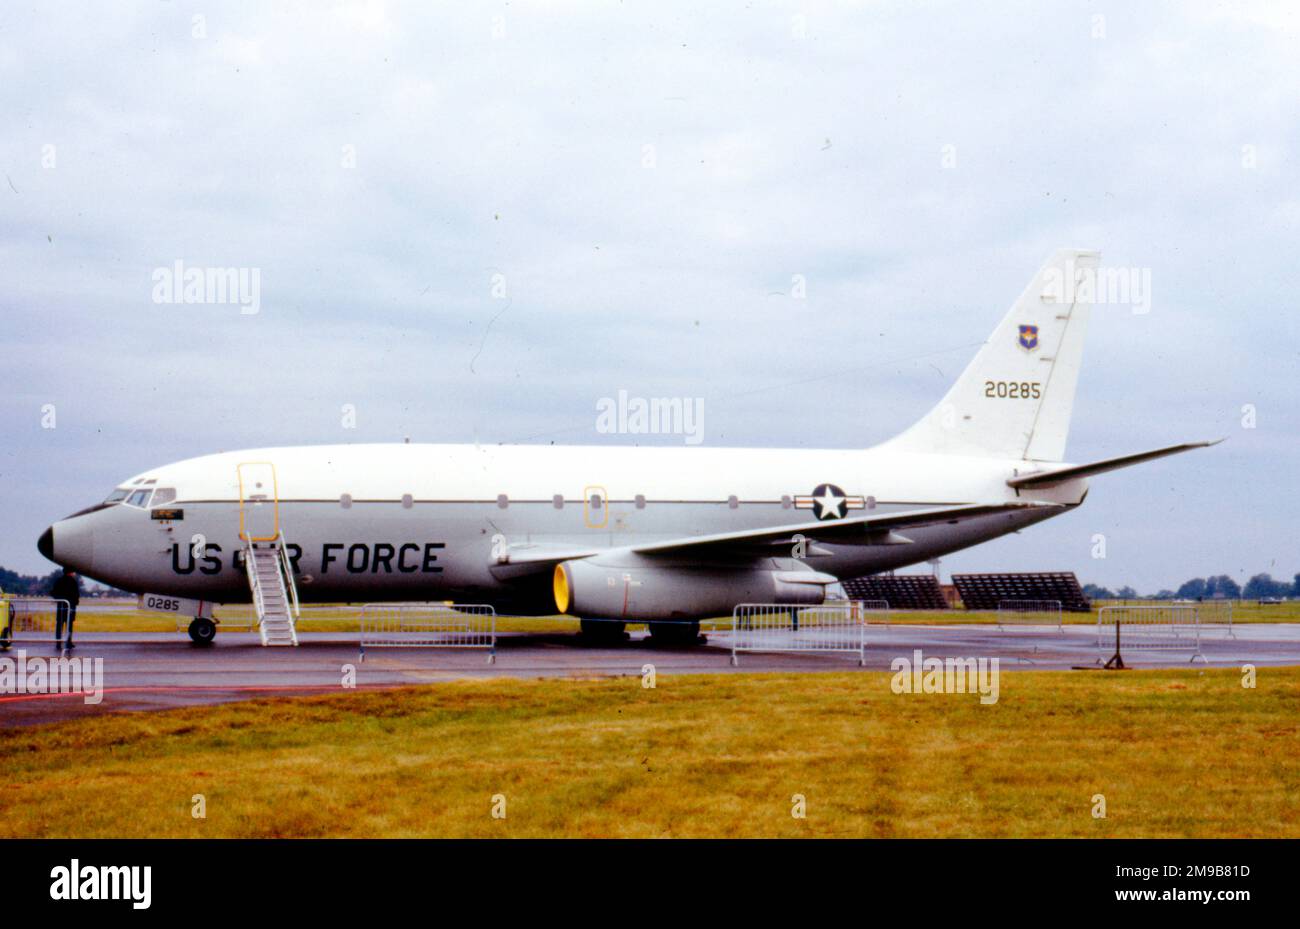 United States Air Force (USAF) - Boeing CT-43A-BN 72-0285 (MSN 20692/339) Banque D'Images